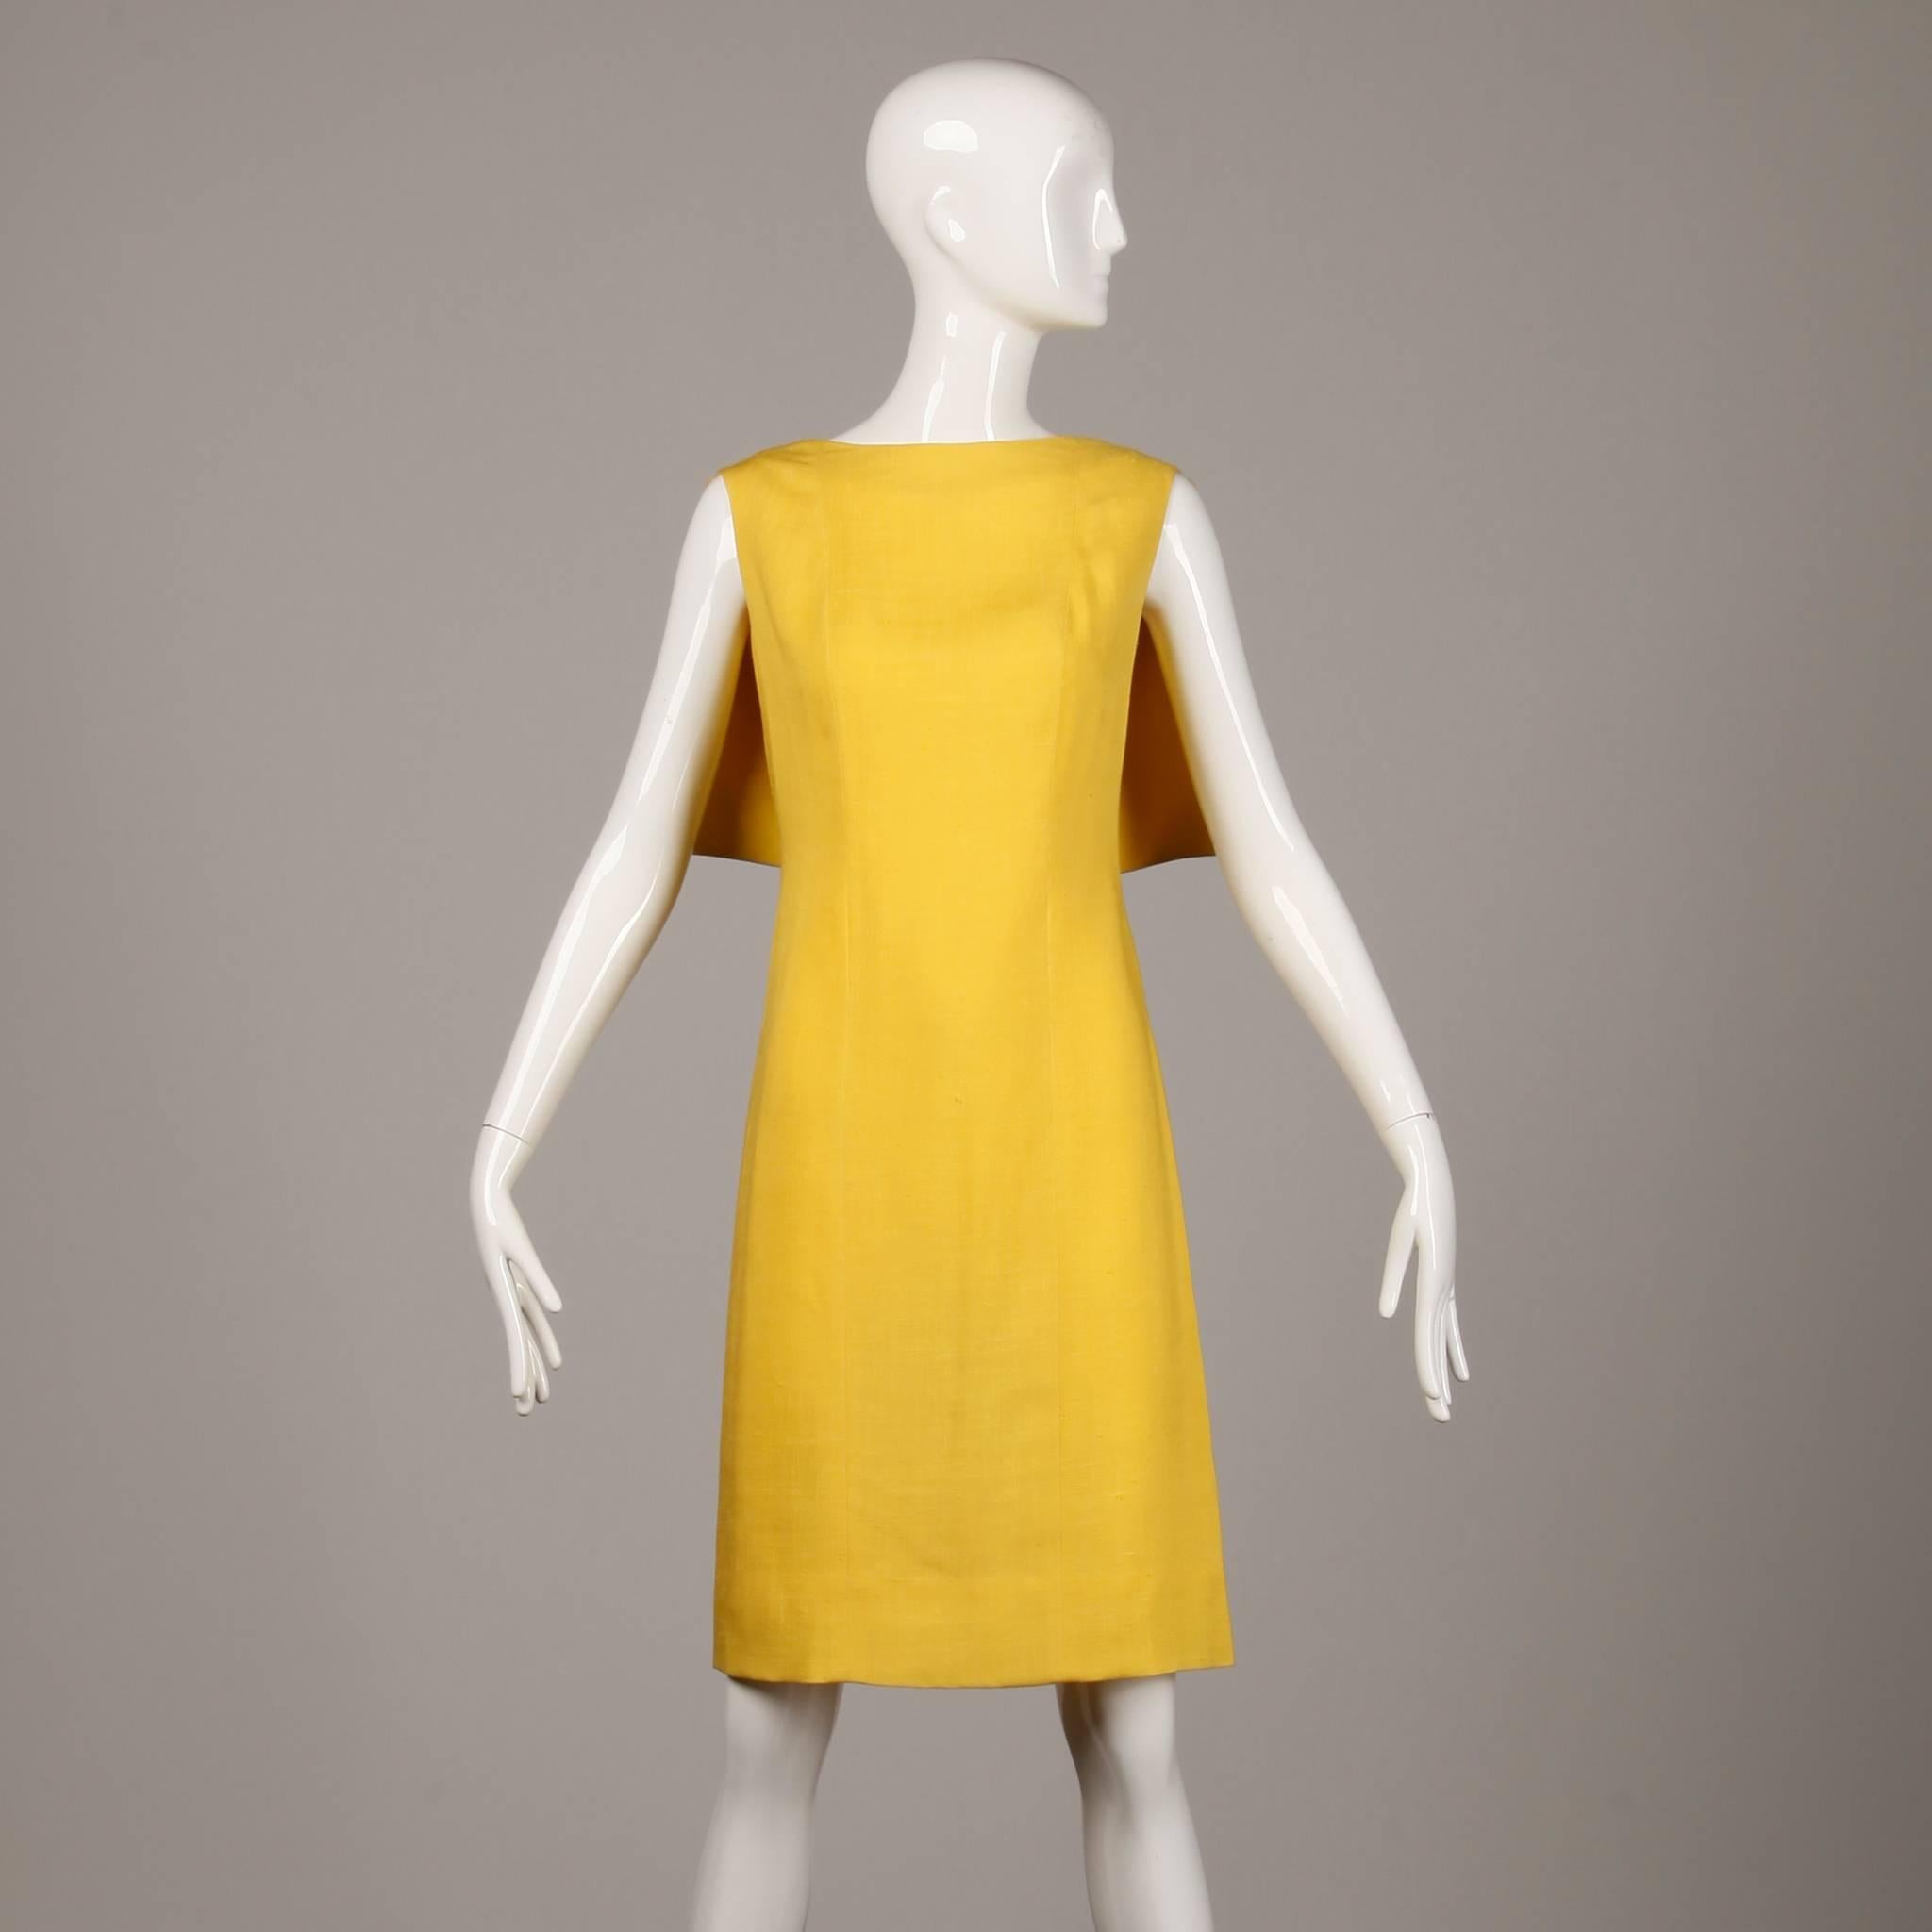 Bright yellow vintage 1960s sheath dress with rear cape detail by Pauline Trigere. Fully lined in silk with zip, hook and tie back closure. The bust measures 35", waist 27.5", hips 35", total length 38.5". There is a seam